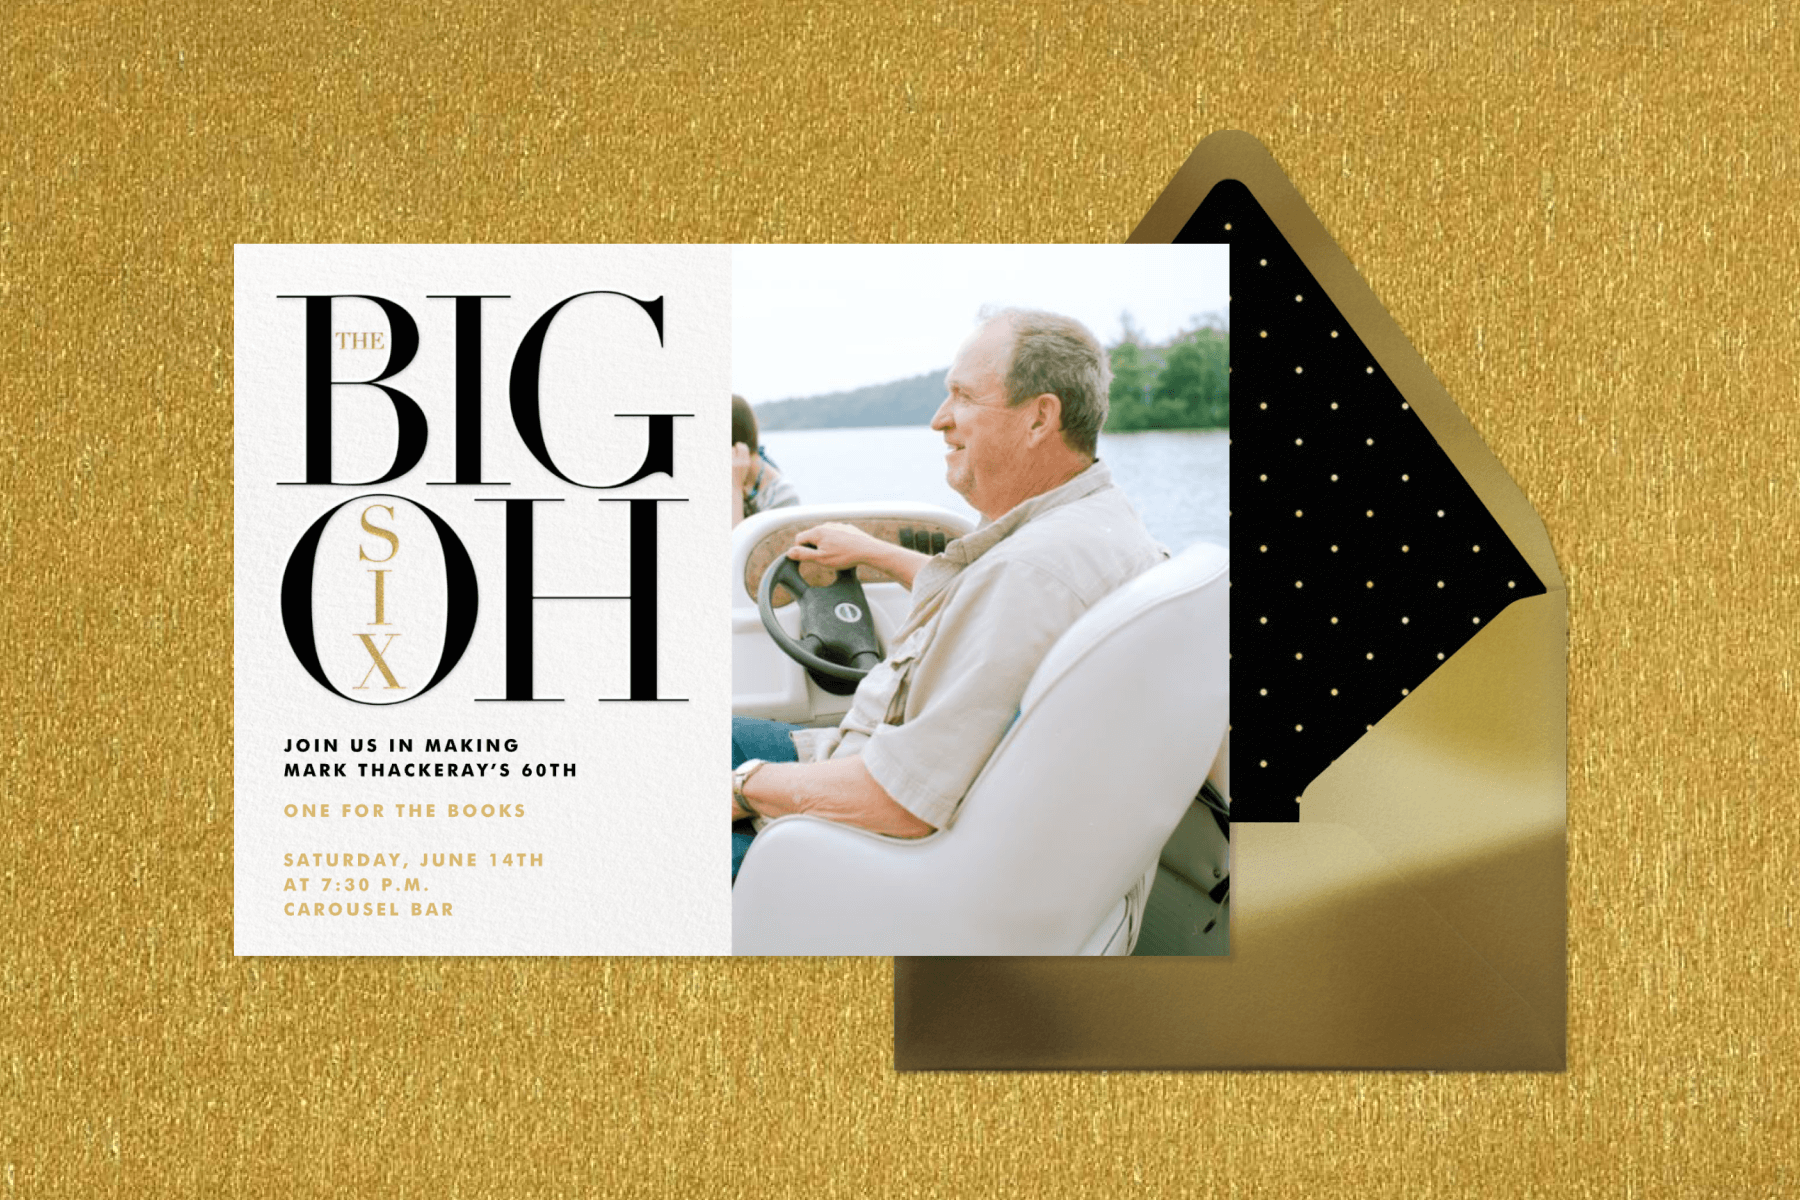 A 60th birthday invitation with the words "The Big Oh Six" with room for a photo next to it.